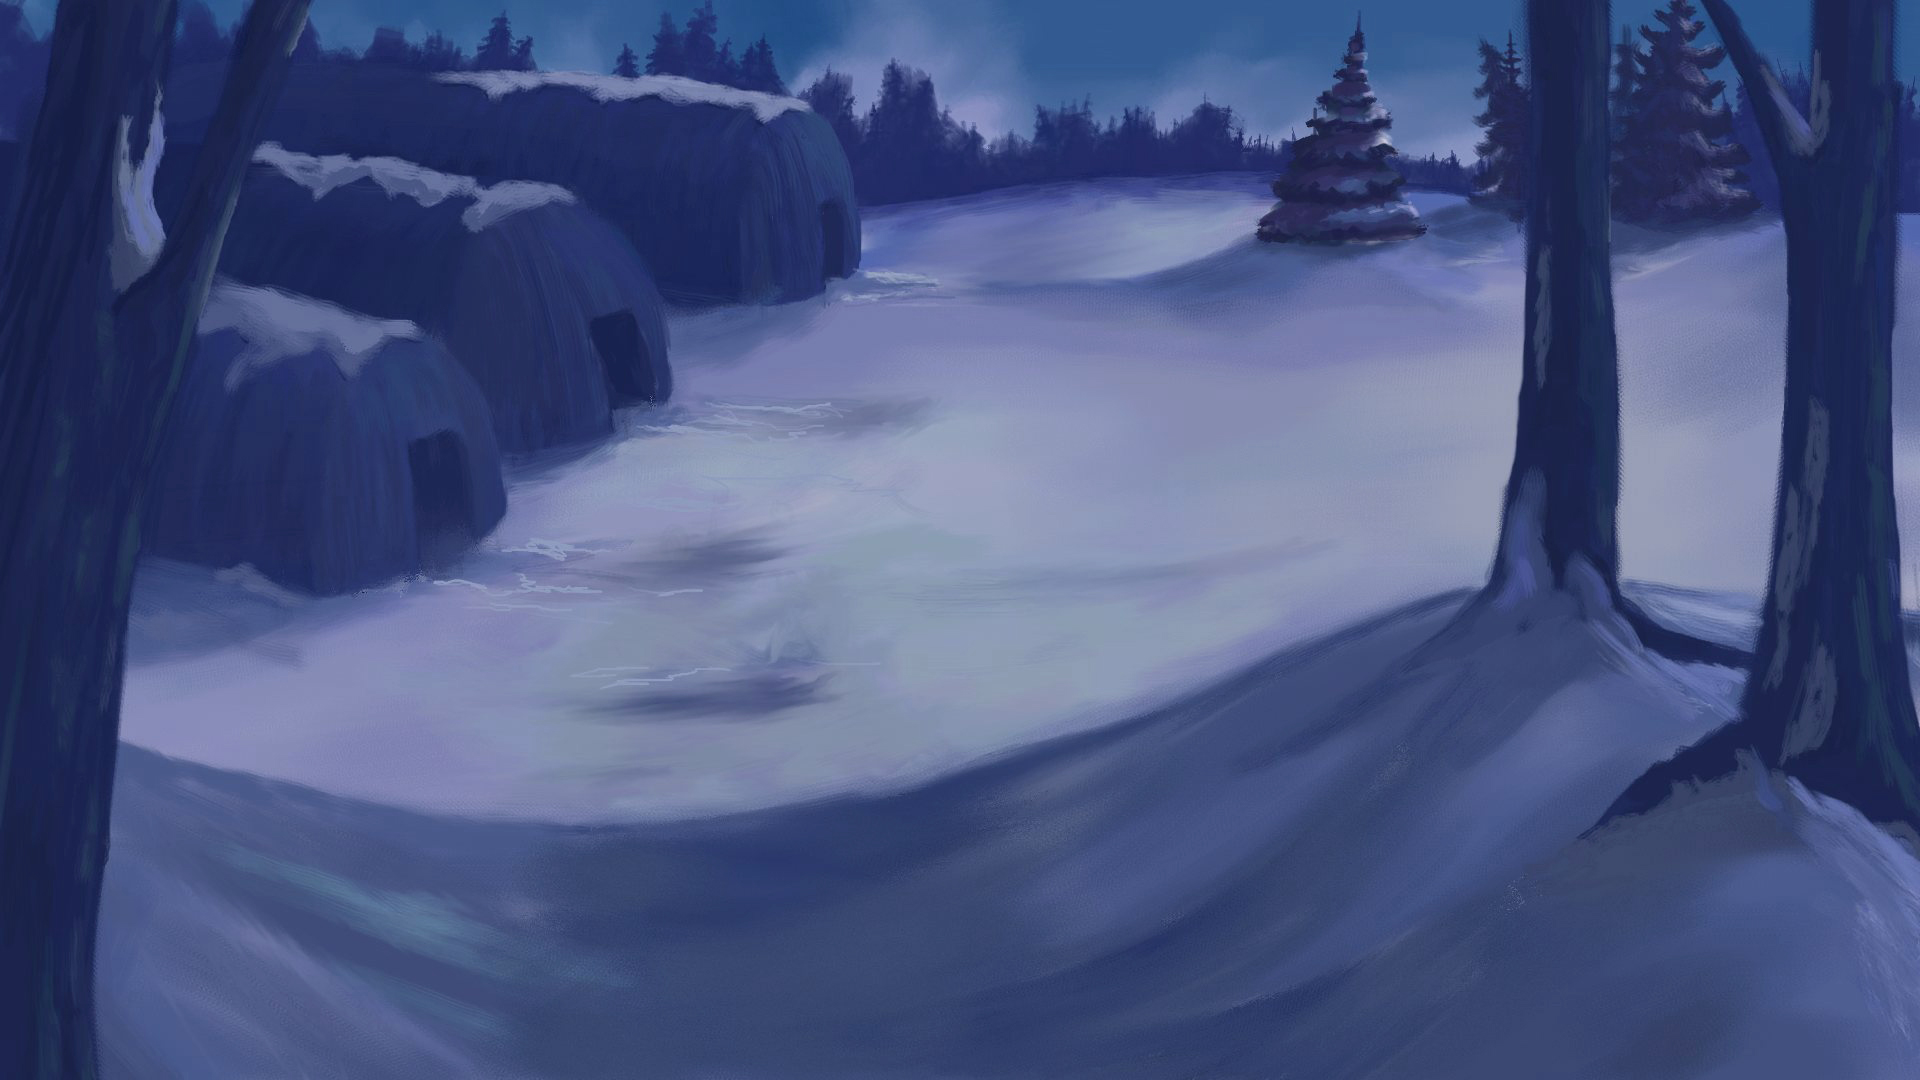 Animation background and overlay. Corel Painter.